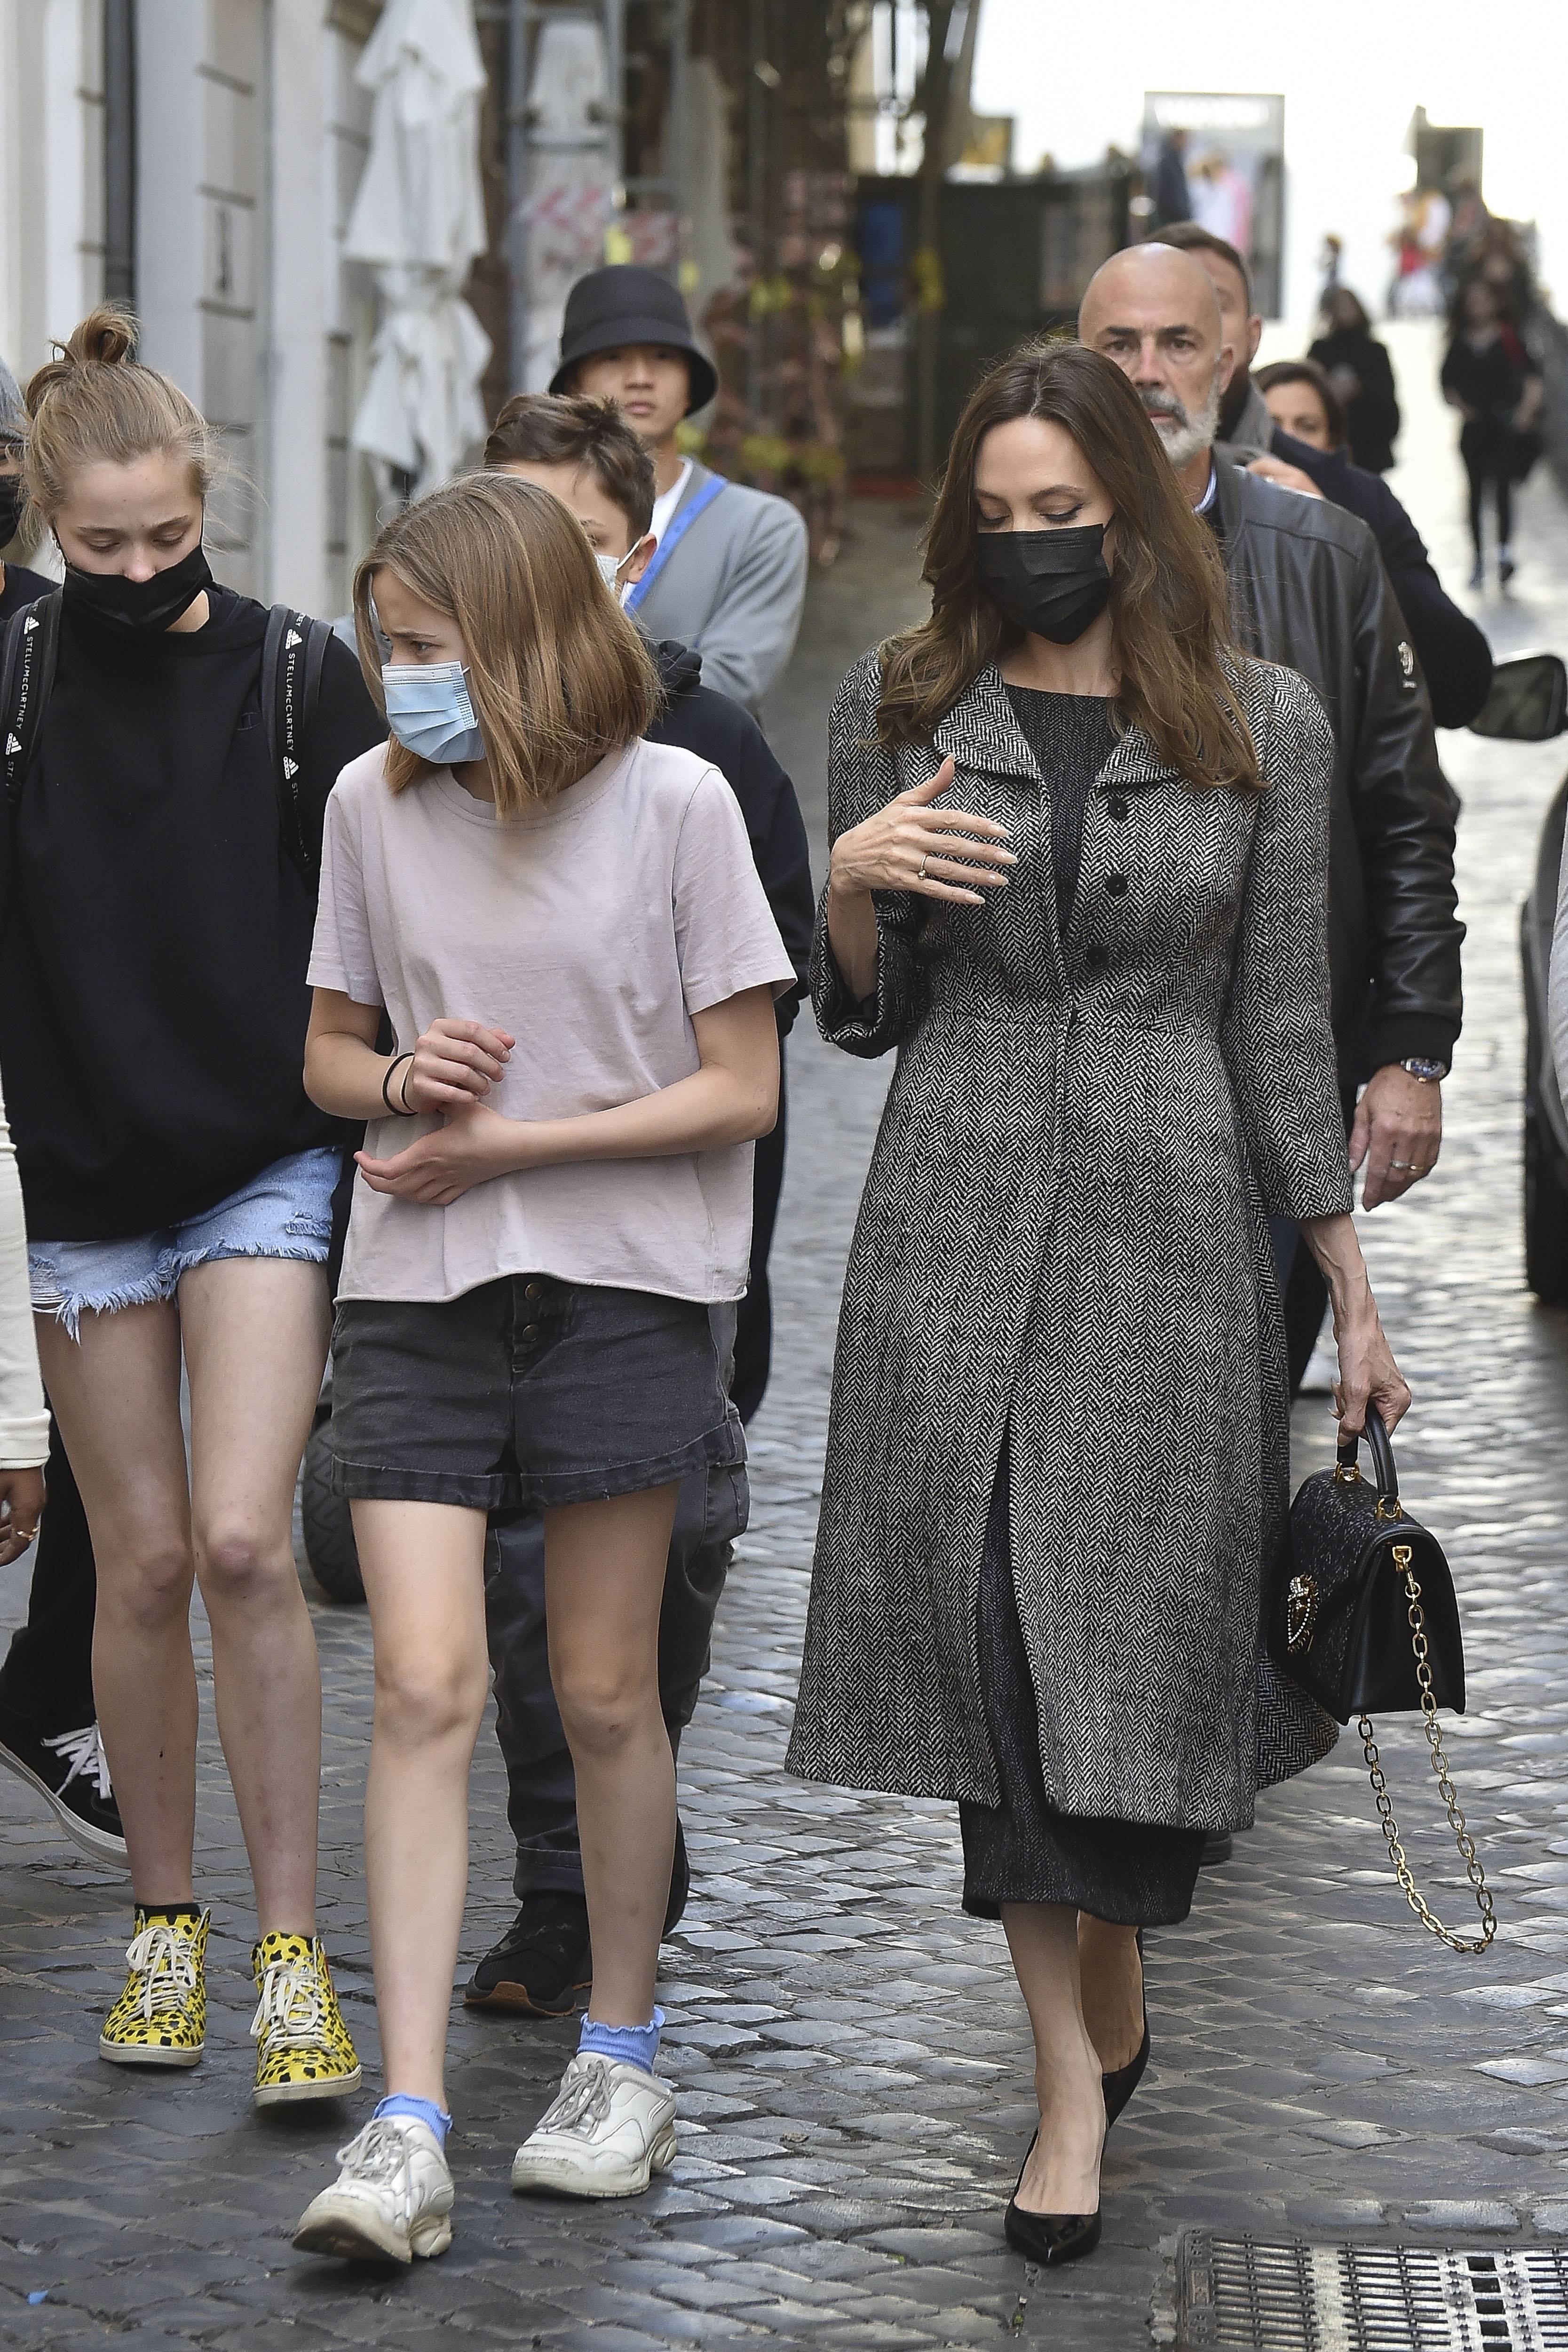 Shiloh and Vivienne Jolie-Pitt with Angelina Jolie in Rome, Italy on October 24, 2021 | Source: Getty Images